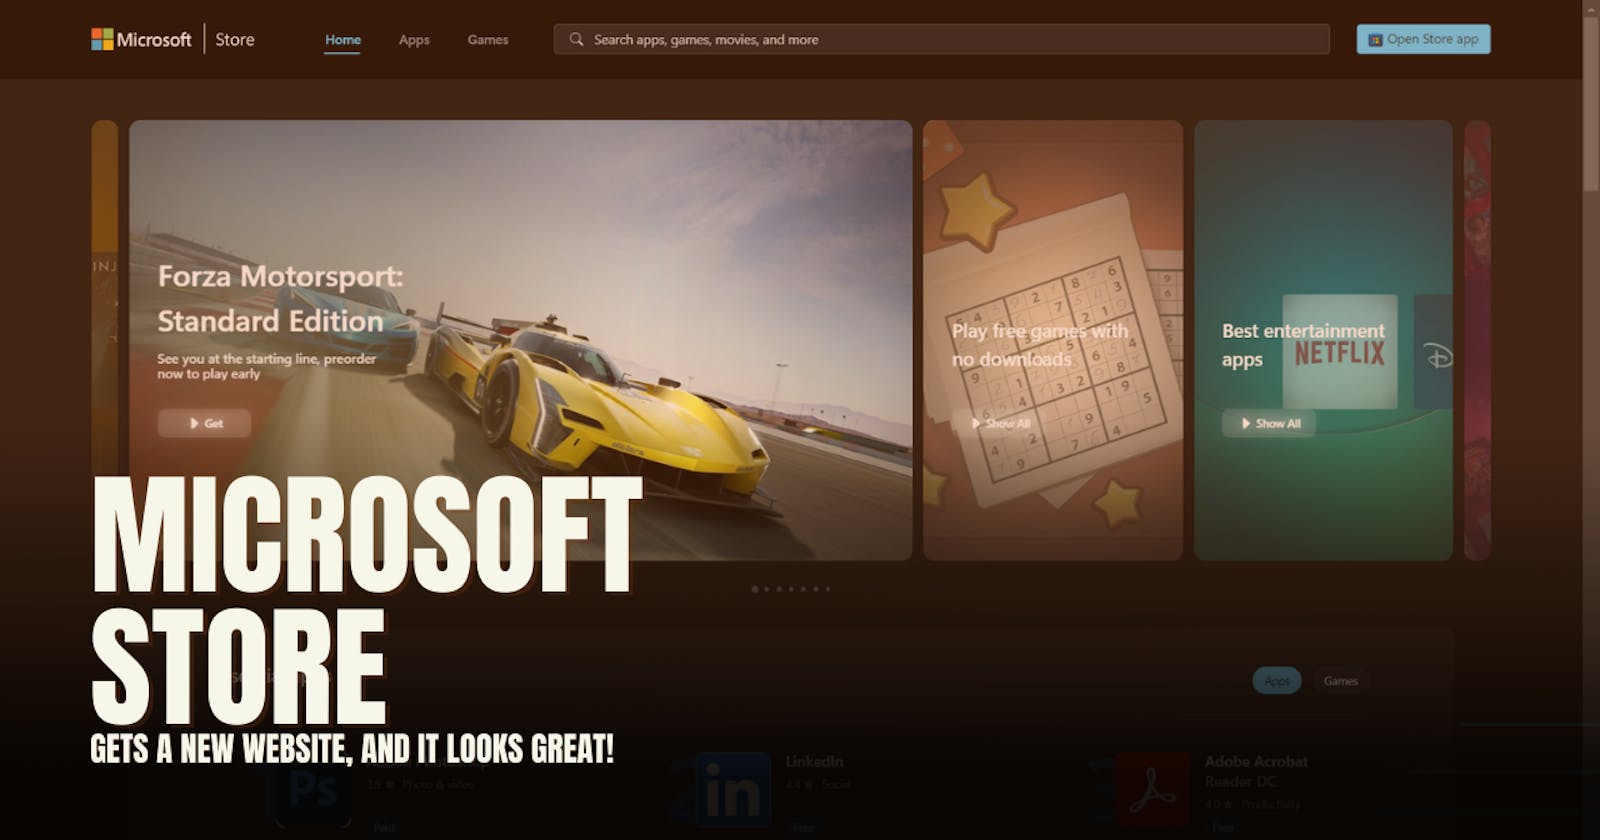 Microsoft Store gets a new website, and it looks great!